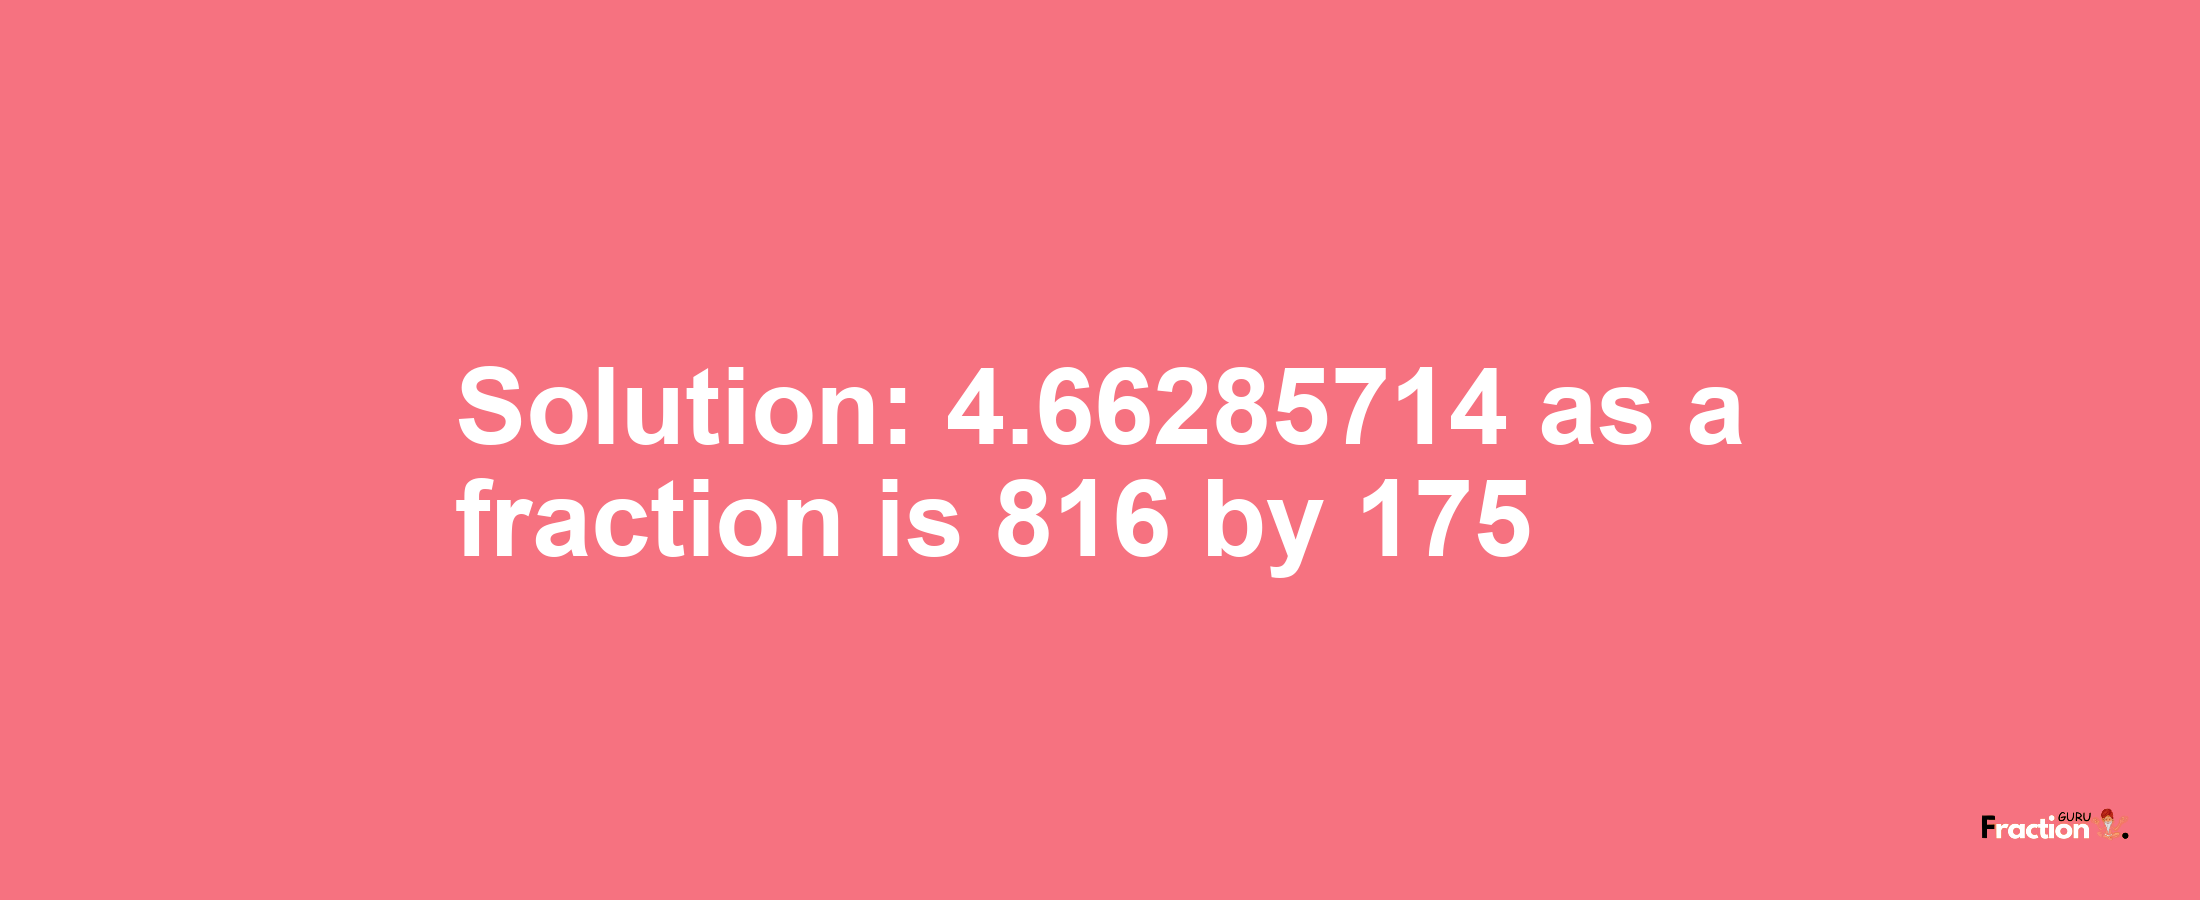 Solution:4.66285714 as a fraction is 816/175